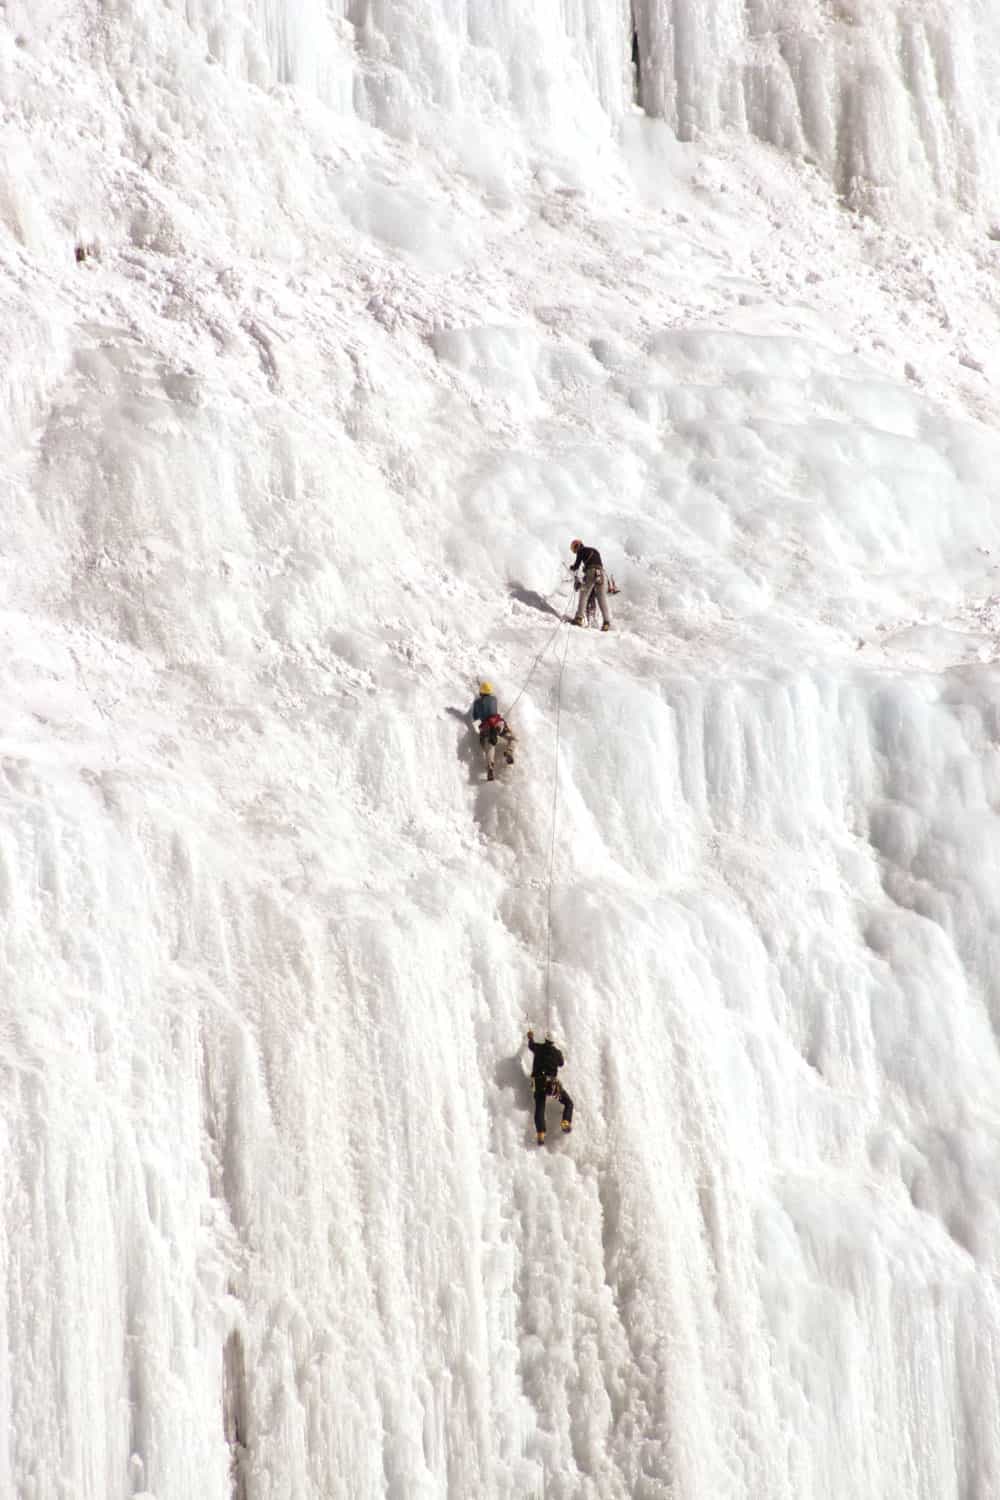 Ice climbers at Weeping Wall in Banff National Park Alberta